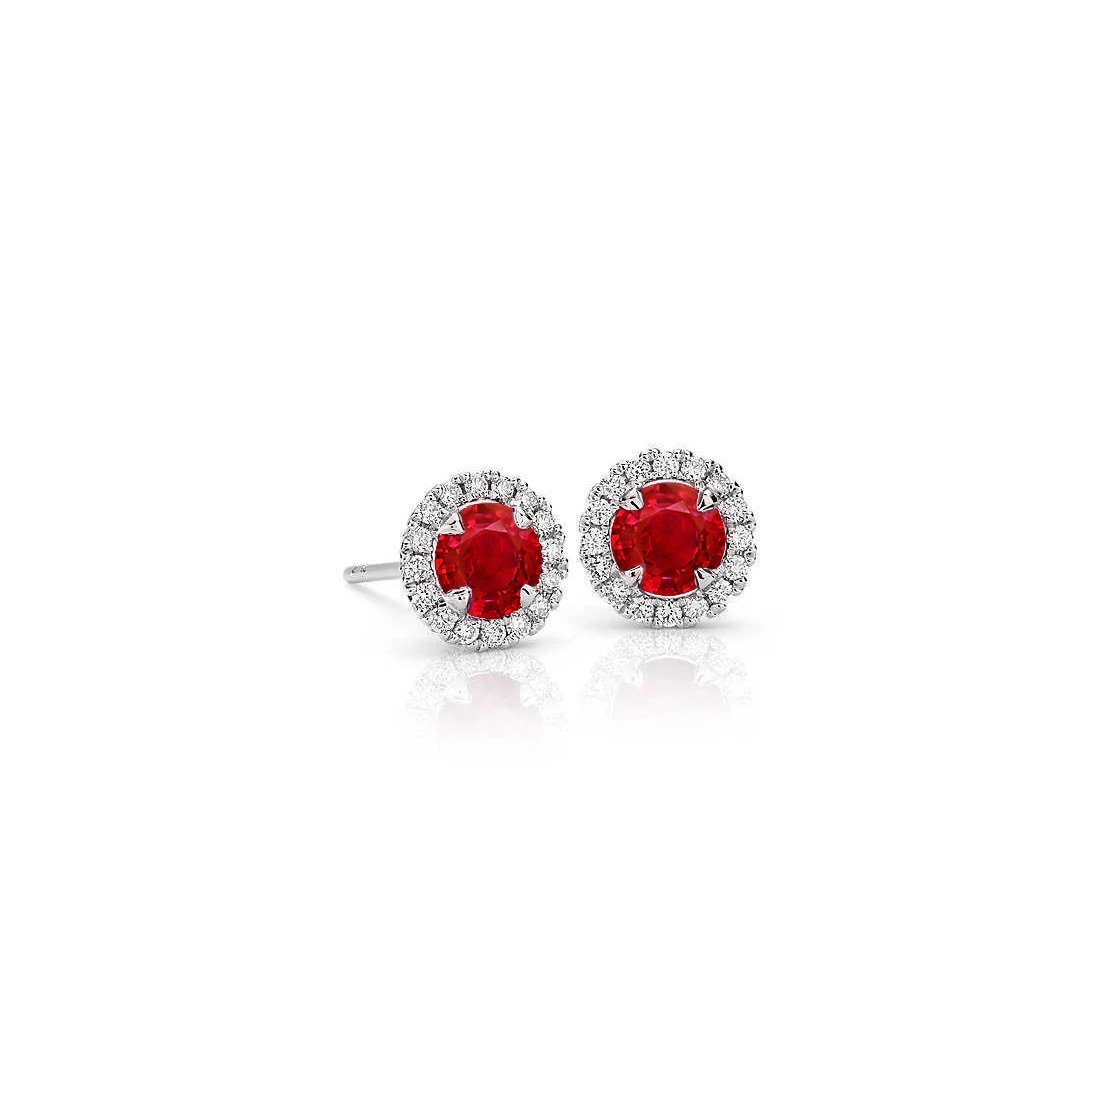 53939 Halo White Gold Round Cut 3.80 CT Ruby with Diamonds Stud Earrings -  Harry Chad Enterprises